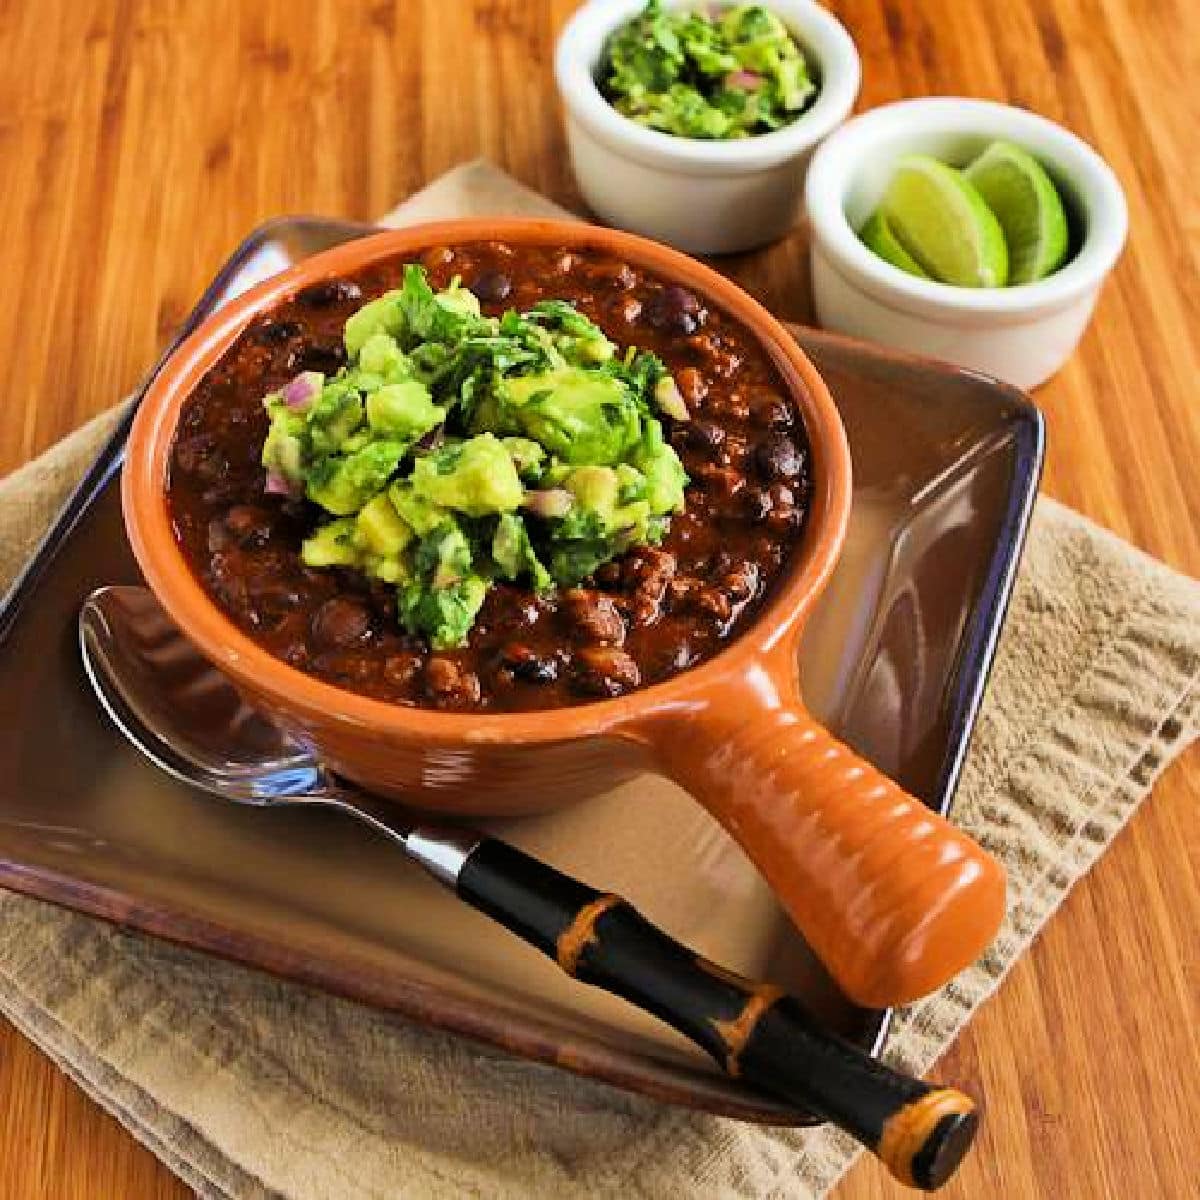 Square image for Black Bean and Beef Chili with avocado salsa, shown in bowl with spoon.